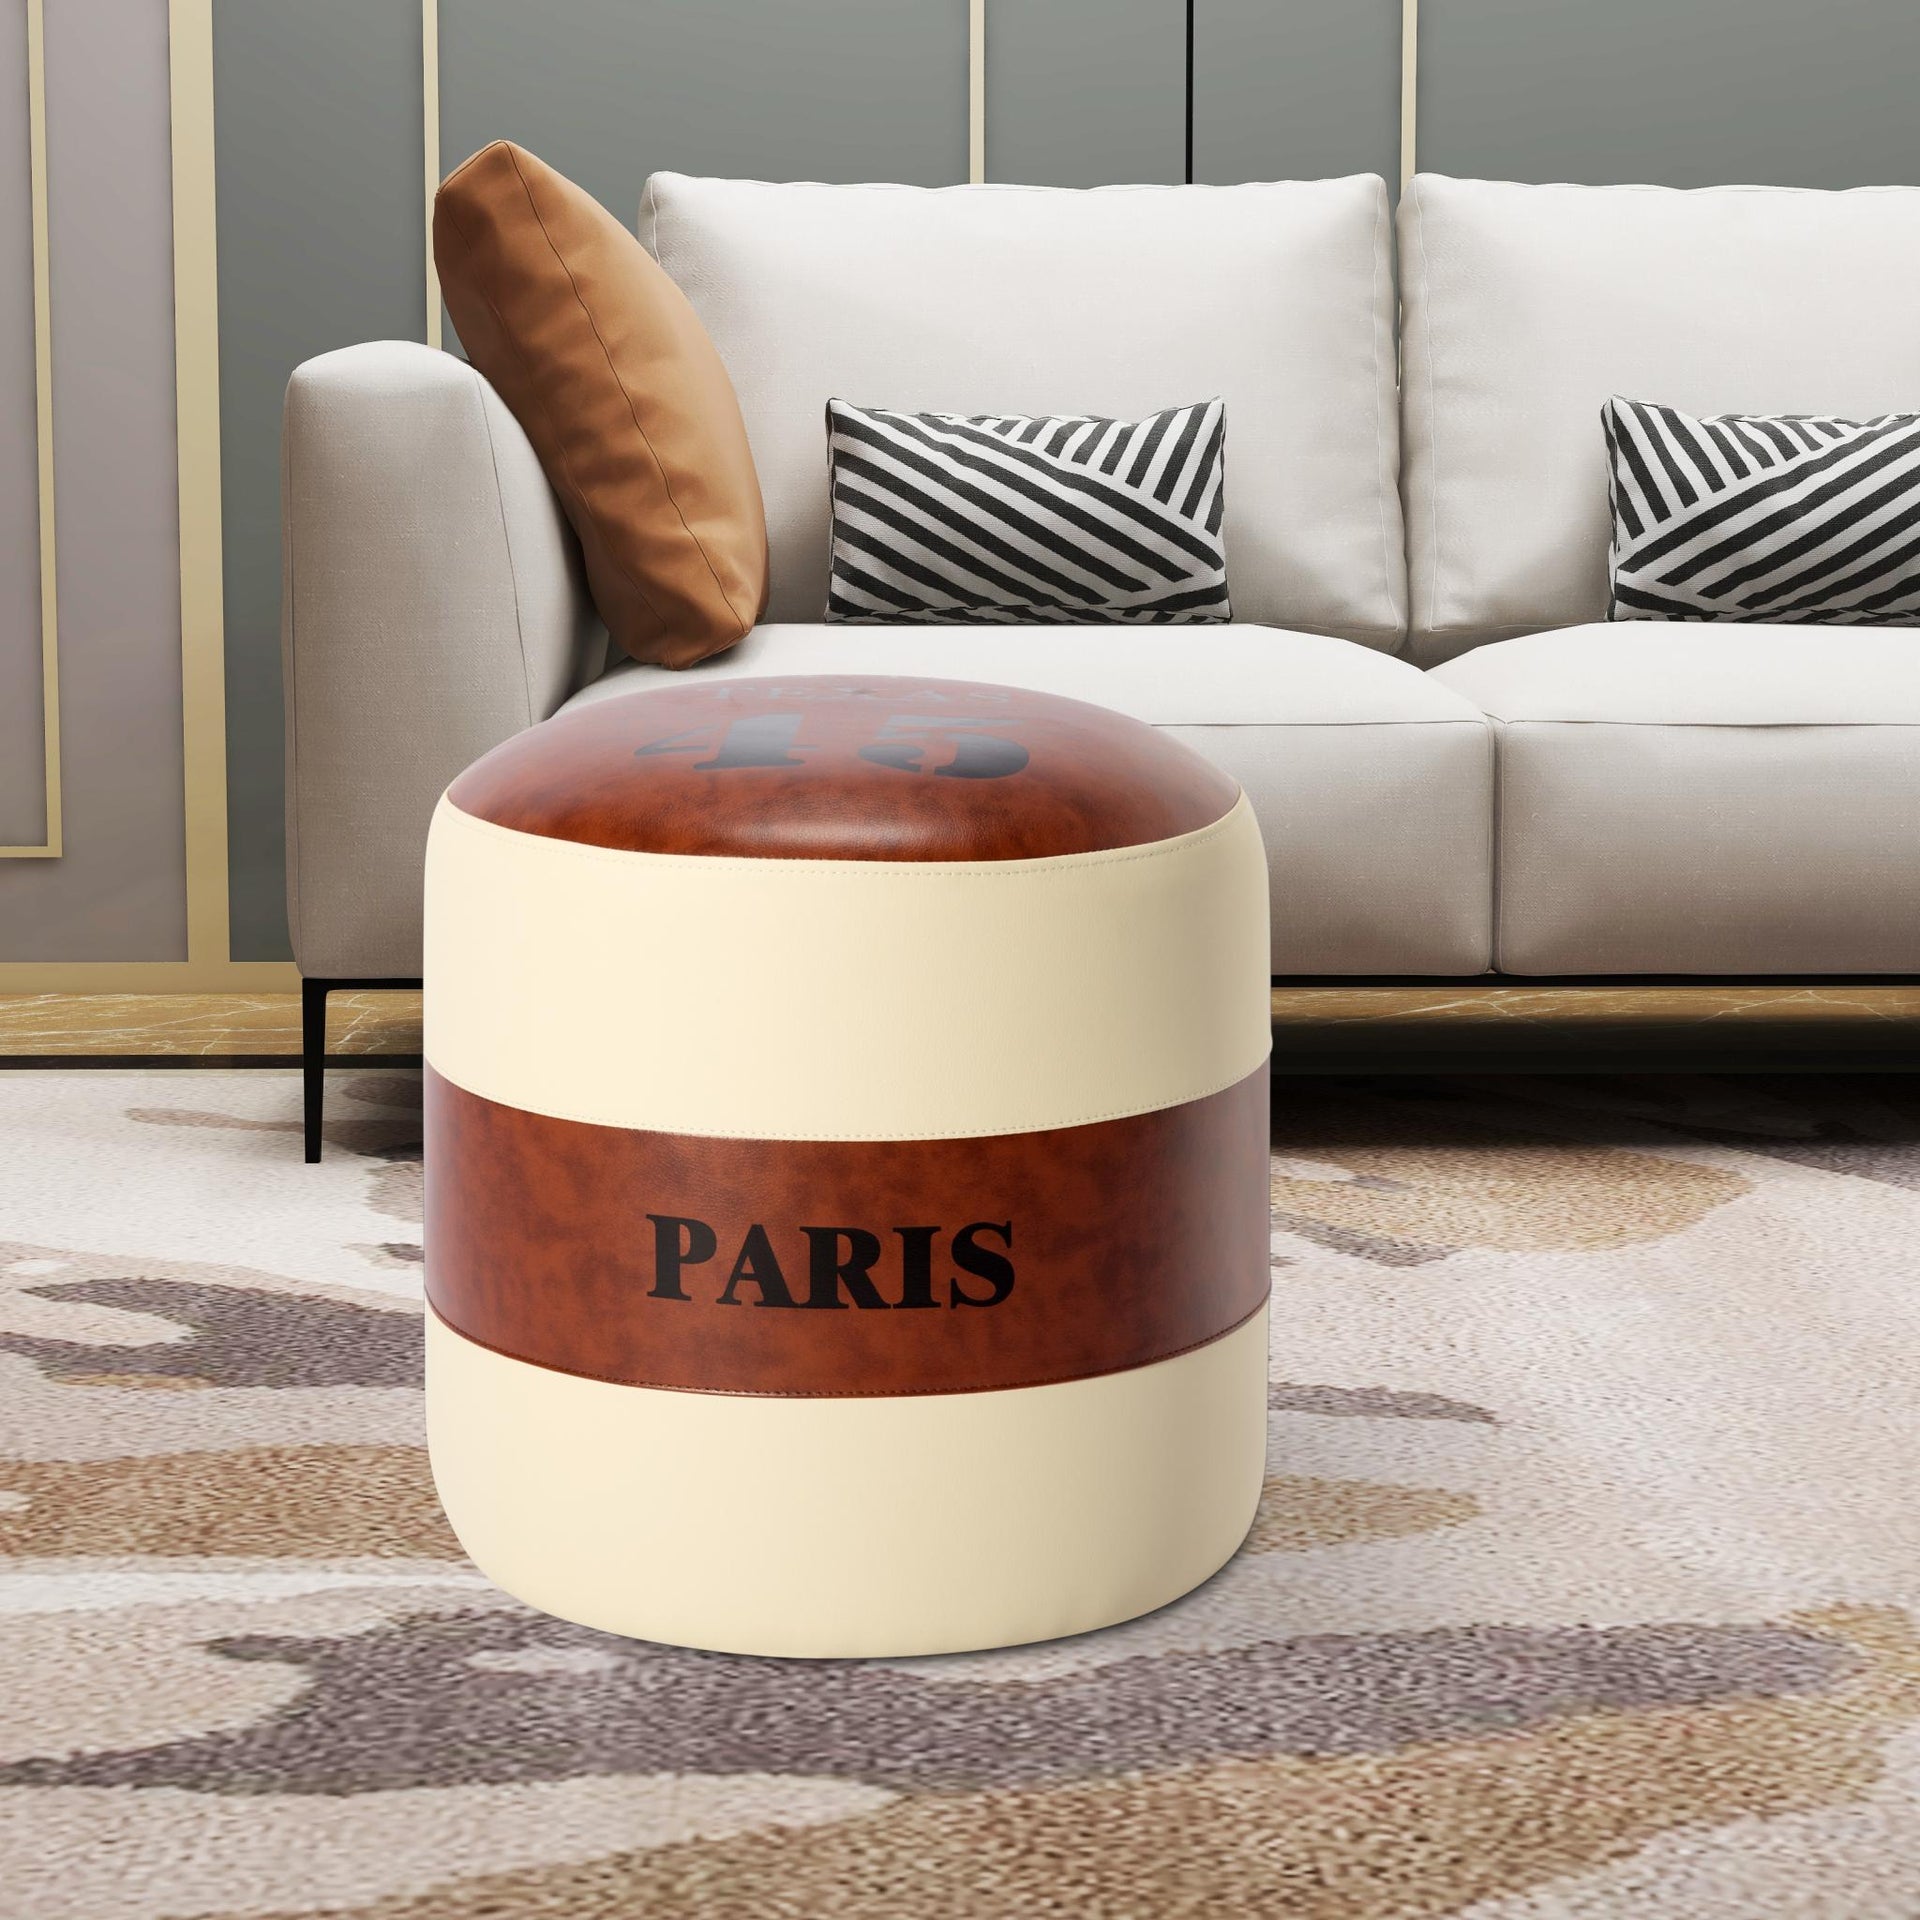 Paris 16.5' Round Ottoman Use As An Extra Seat, Or A Place To Kick Up Your Feet, Ottoman Is A Great Addition To The Office.